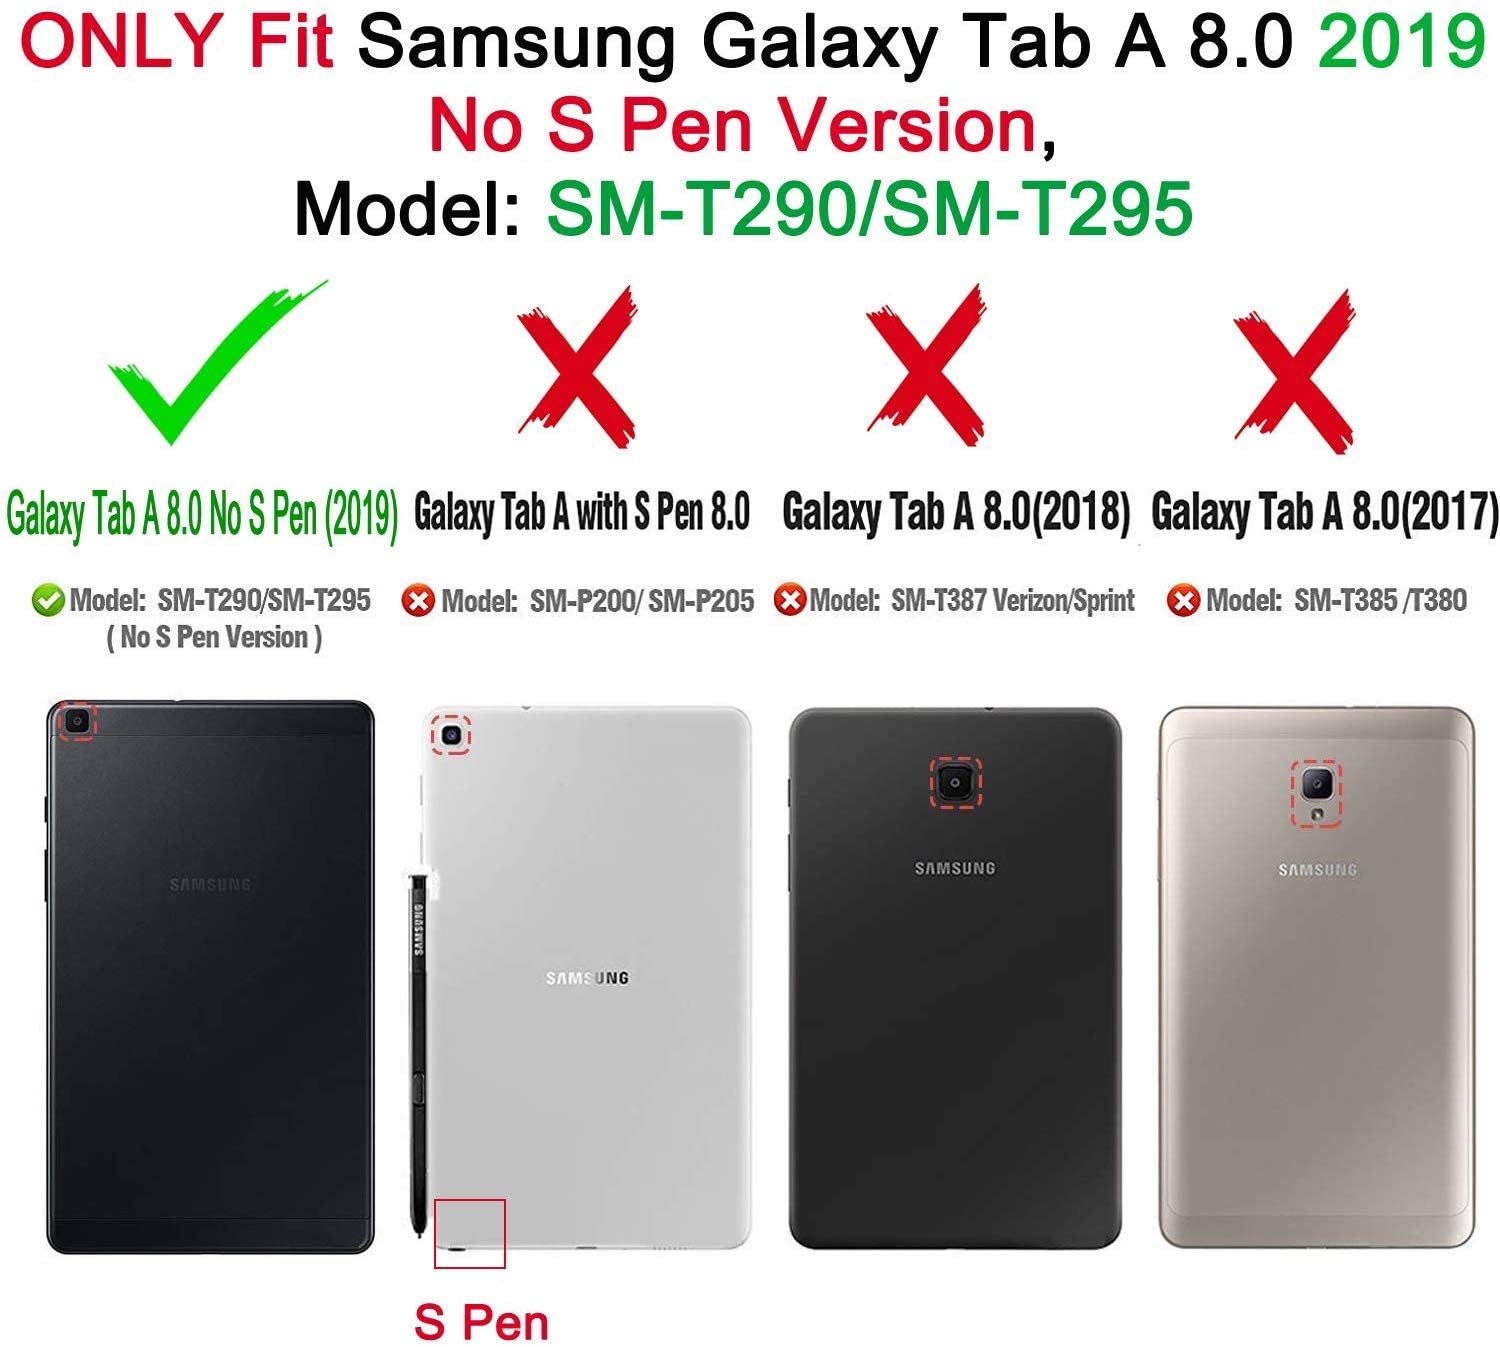 FREE BMOUO for Samsung Galaxy Tab A 8.0 Case 2019 SM-T290/T295, Tab A 8.0 2019 Case - e4cents